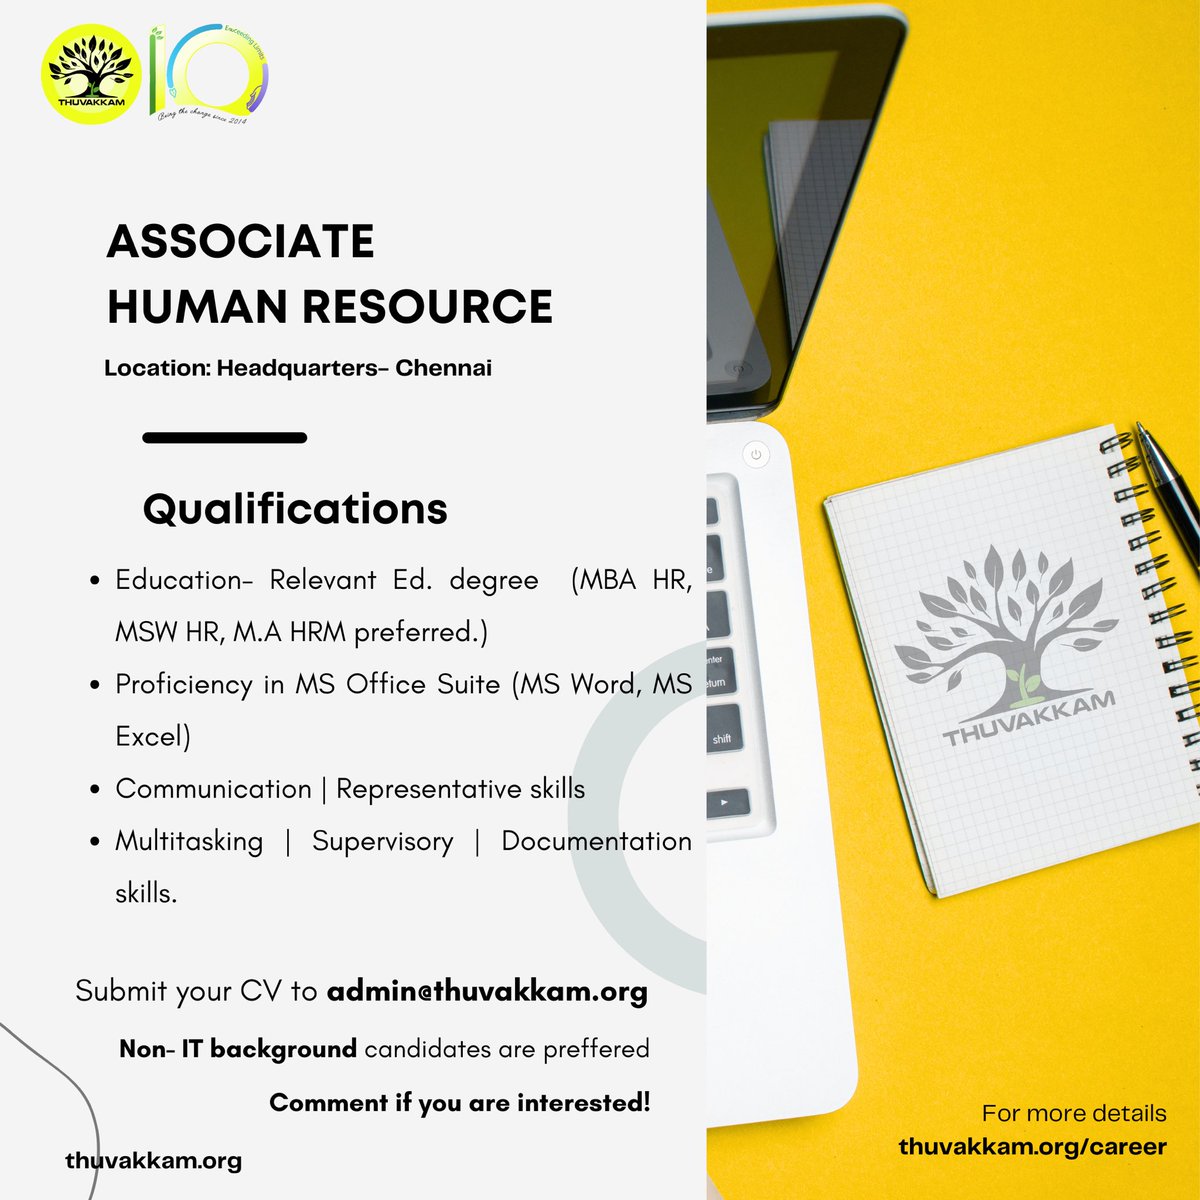 Job vacancy in Thuvakkam. We require an Associate- Human Resource to join our team immediately. Mail us your resume at mailto:admin@thuvakkam.org

Comment in the post if you are interested!

#jobvacancy #recruitment #thuvakkam #hiringpost #hiring #hr #humanresrouce #jobsinchennai